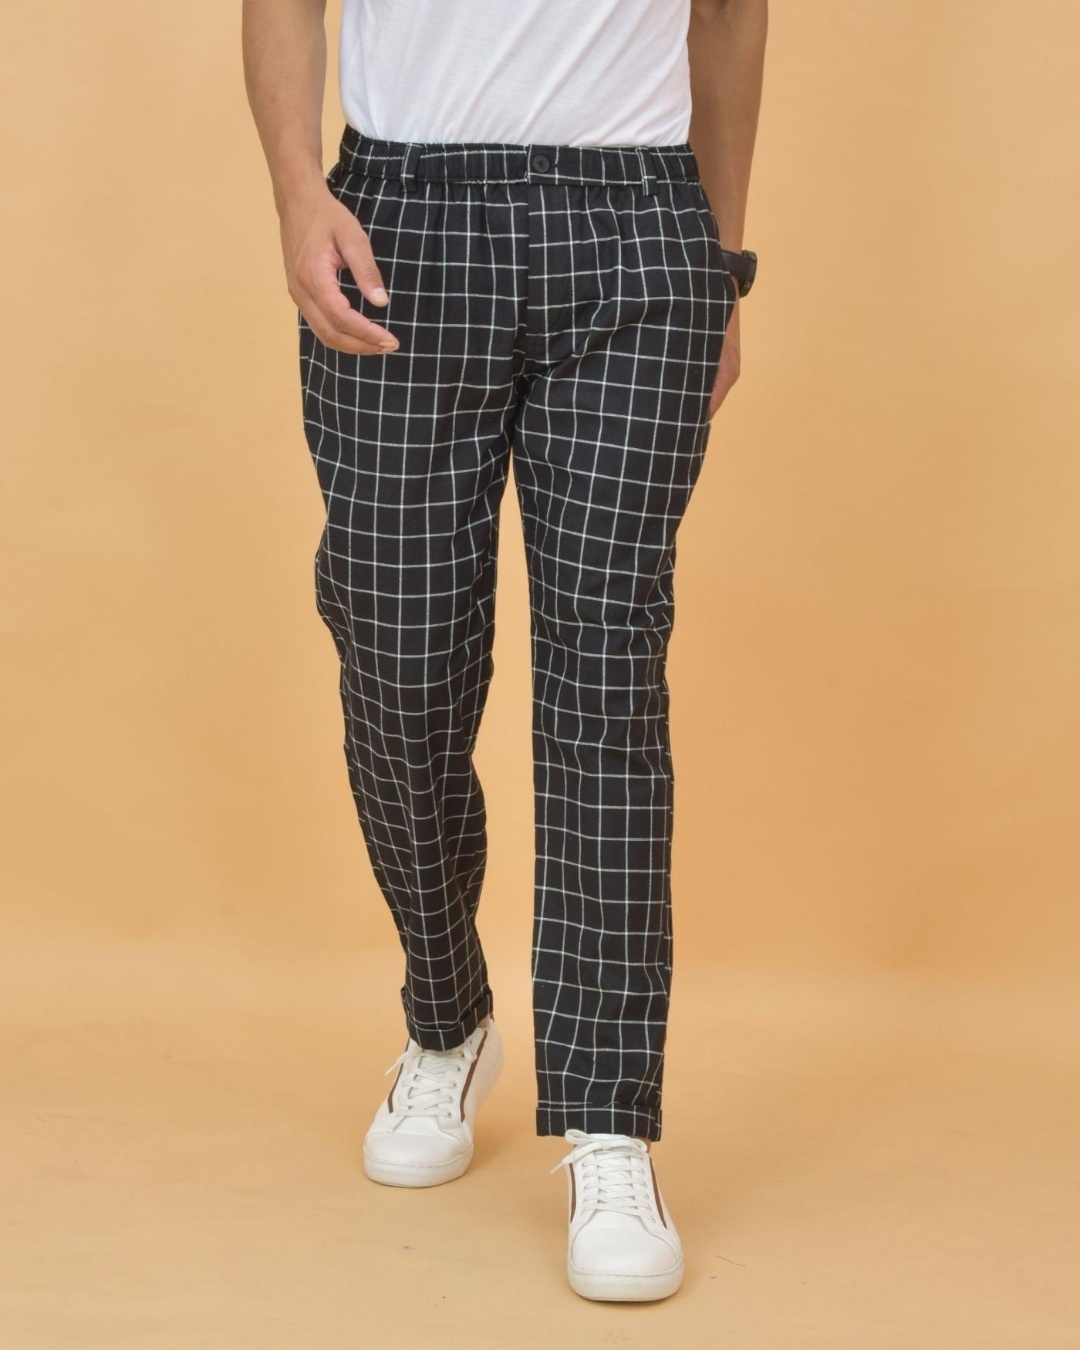 Buy Black Trousers  Pants for Men by The Indian Garage Co Online  Ajiocom